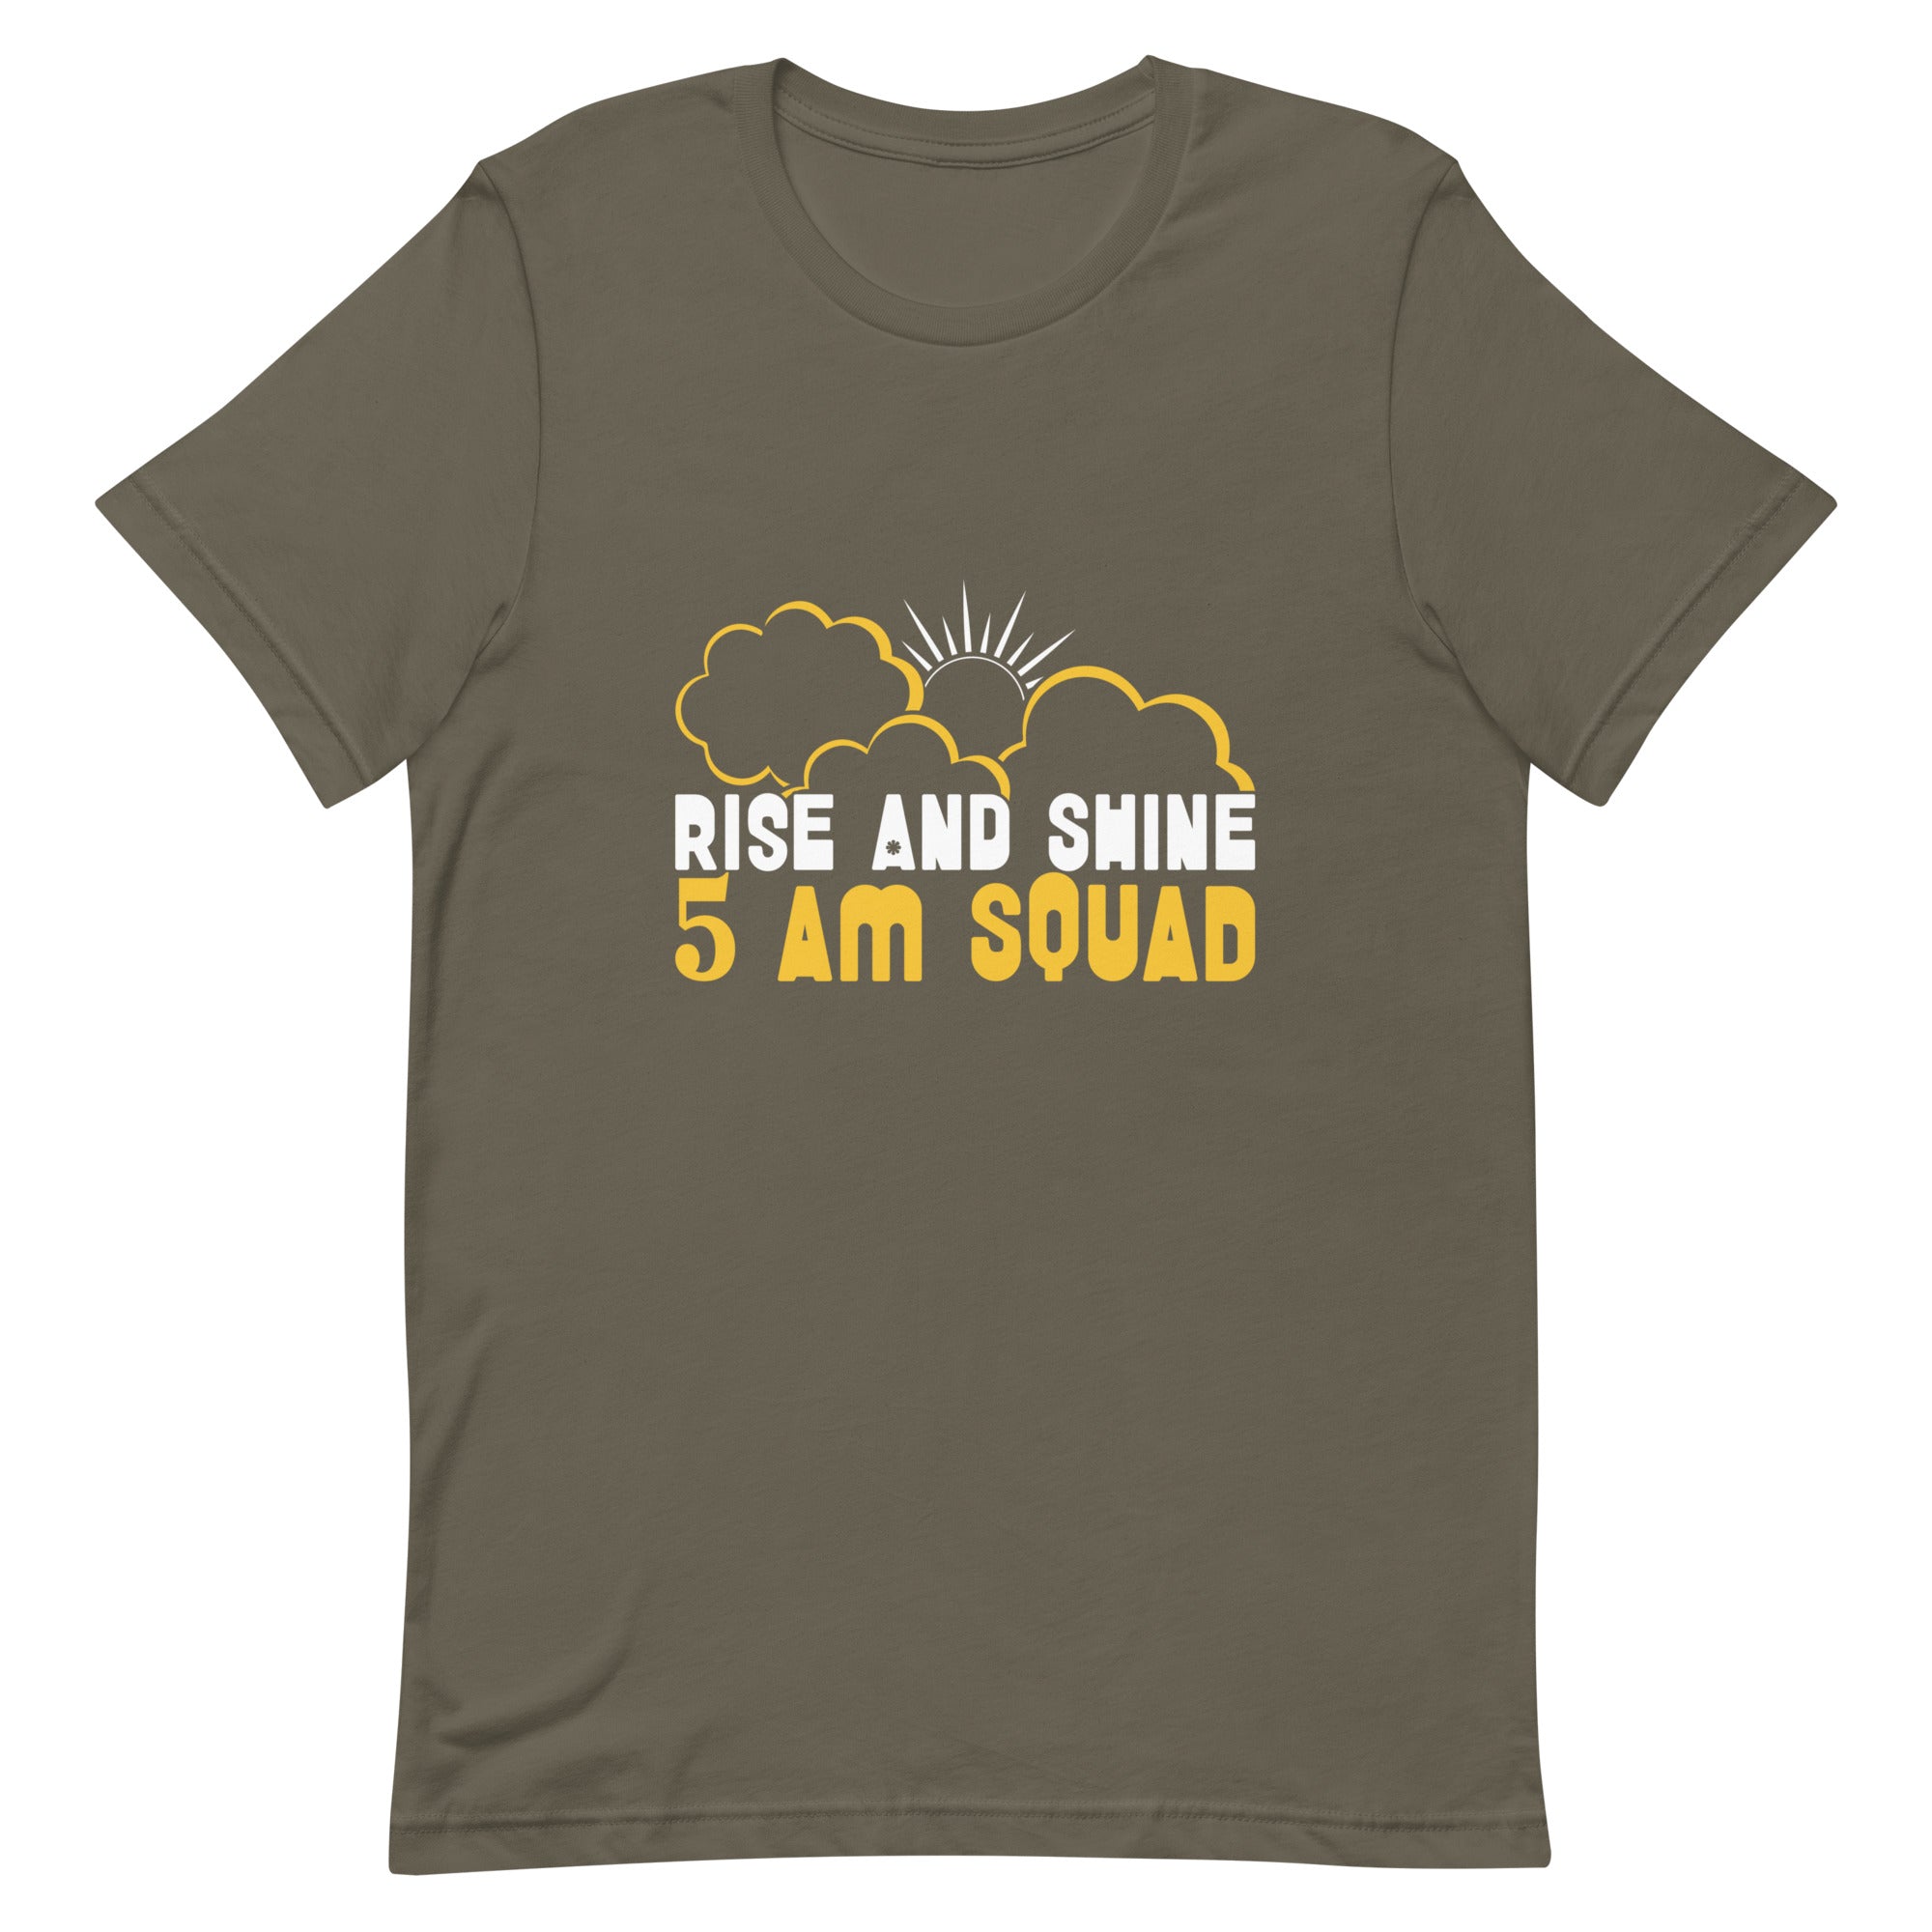 Rise And Shine 5 Am Squad Gym Fitness Training Workout Exercise Crossfit 5 Am Squad Women's T-Shirt